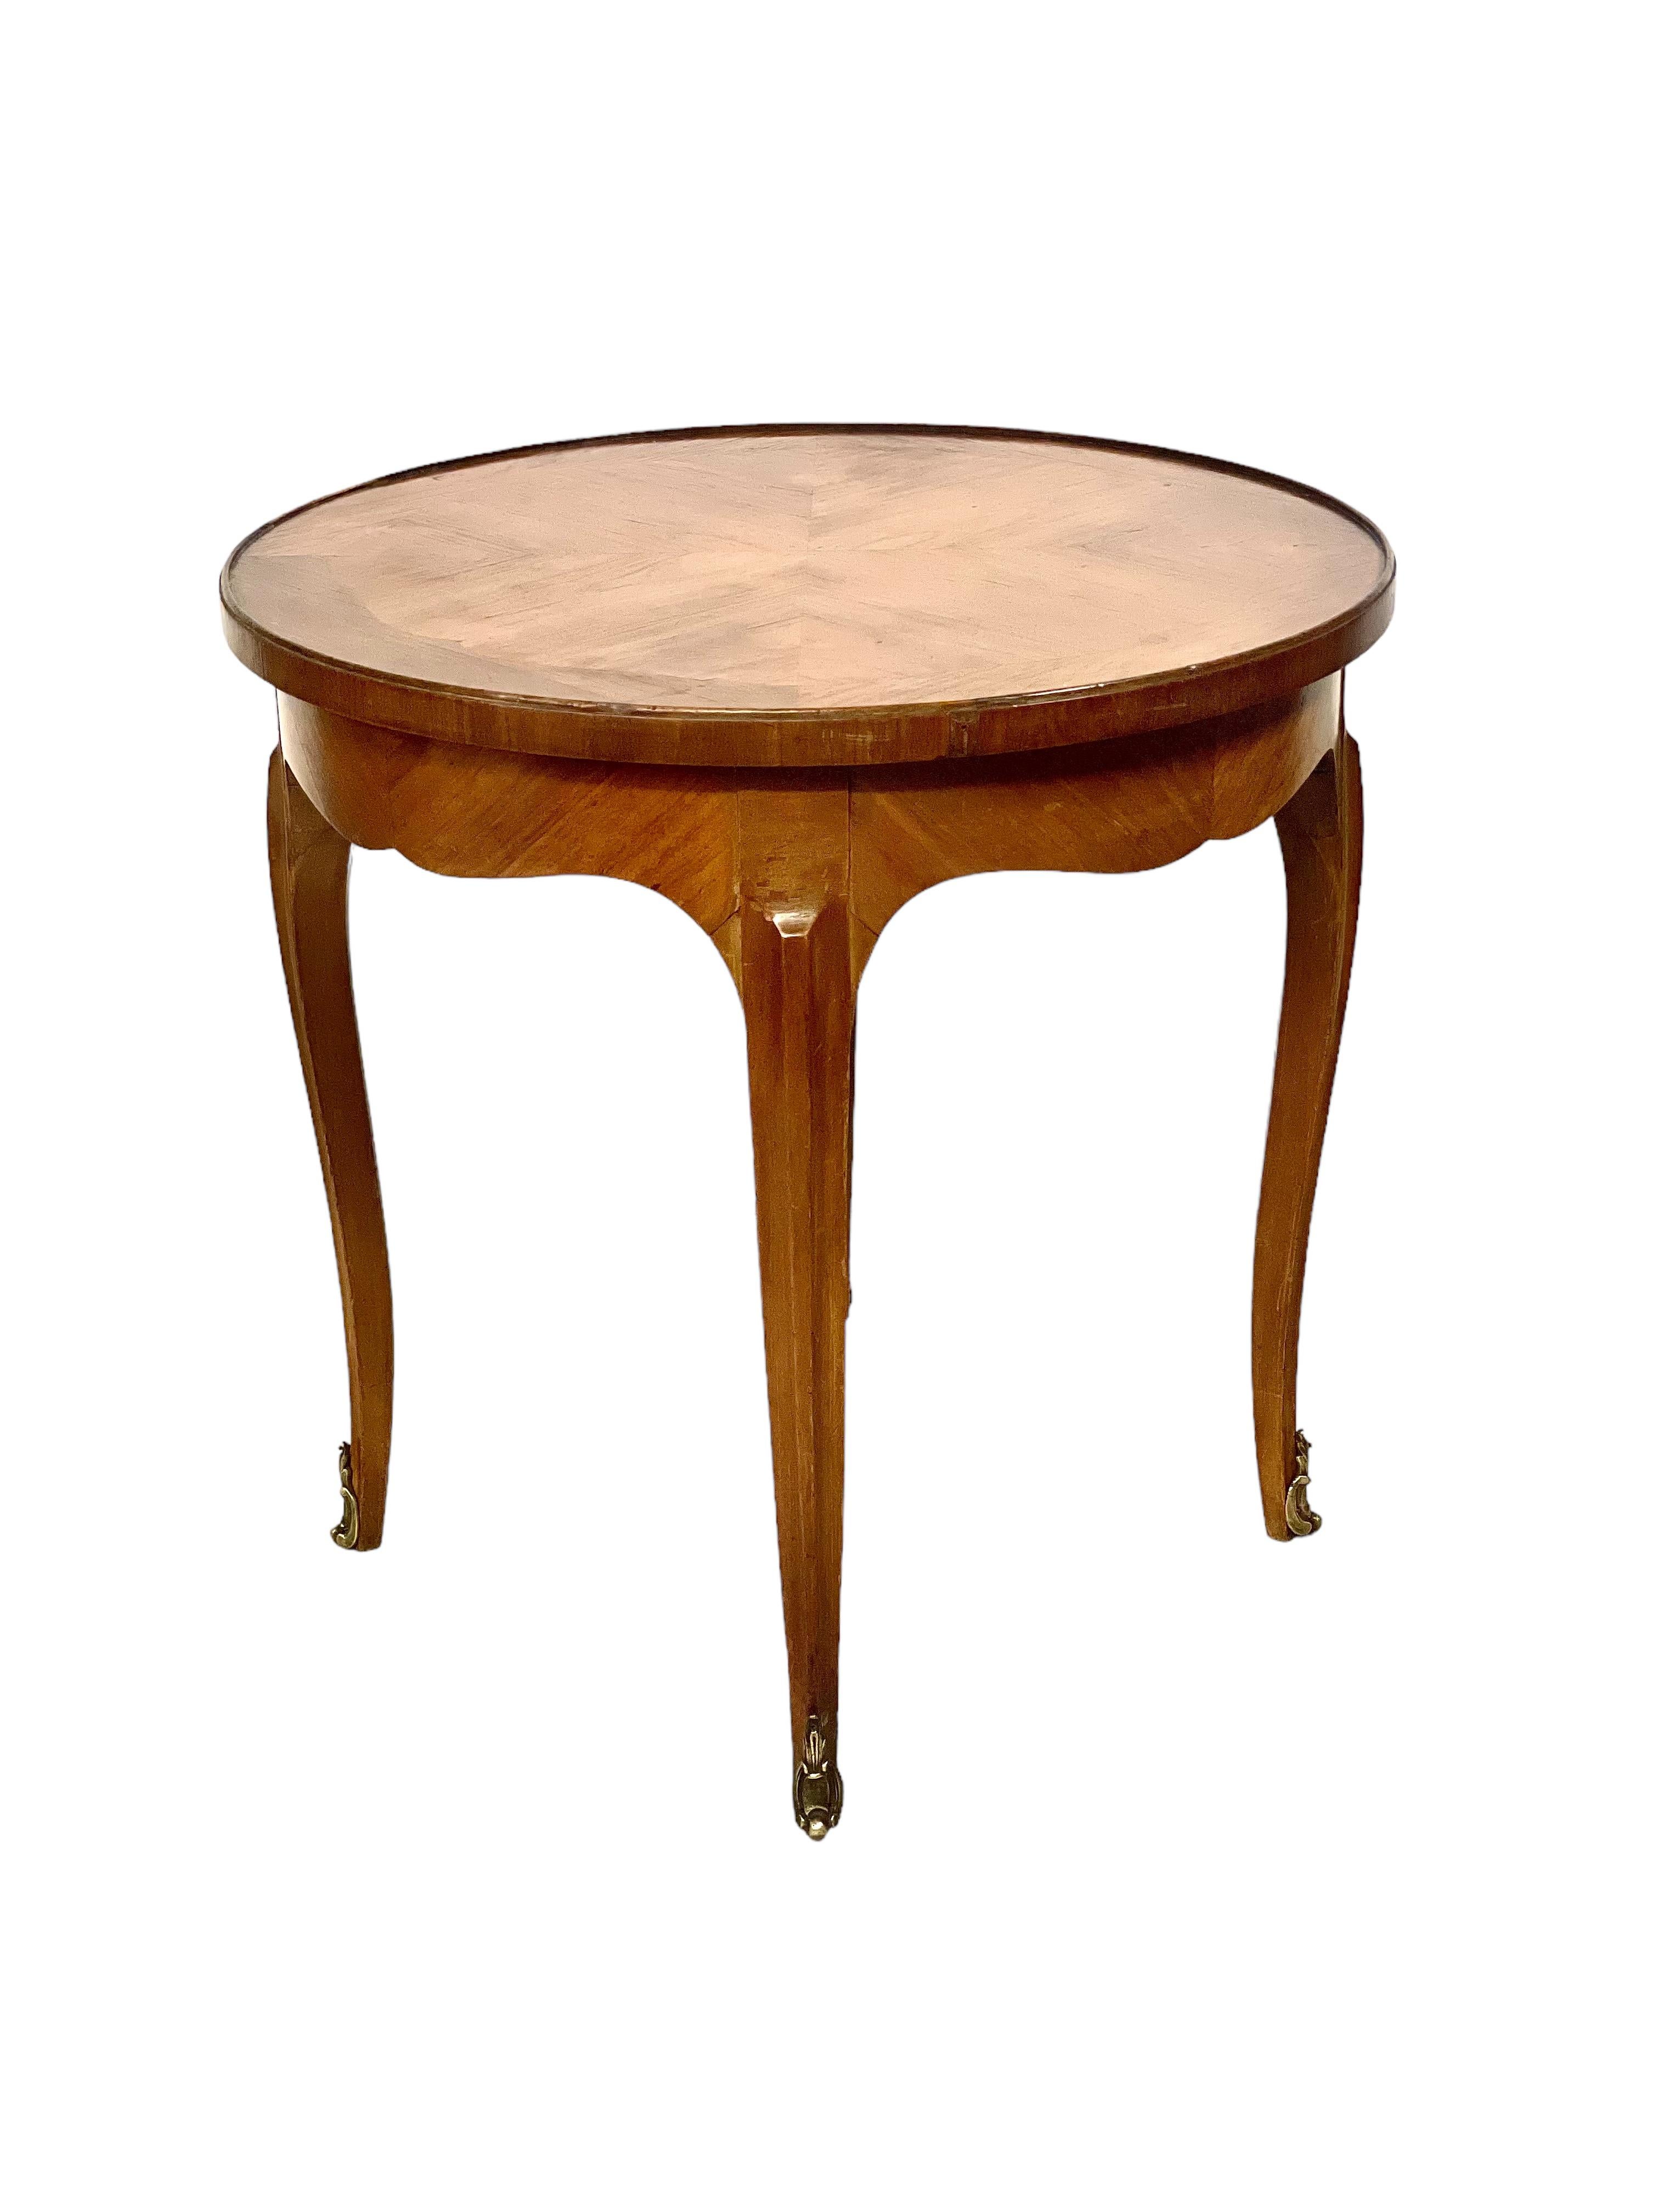 Wood French Antique Round Salon Coffee or Tea Table For Sale